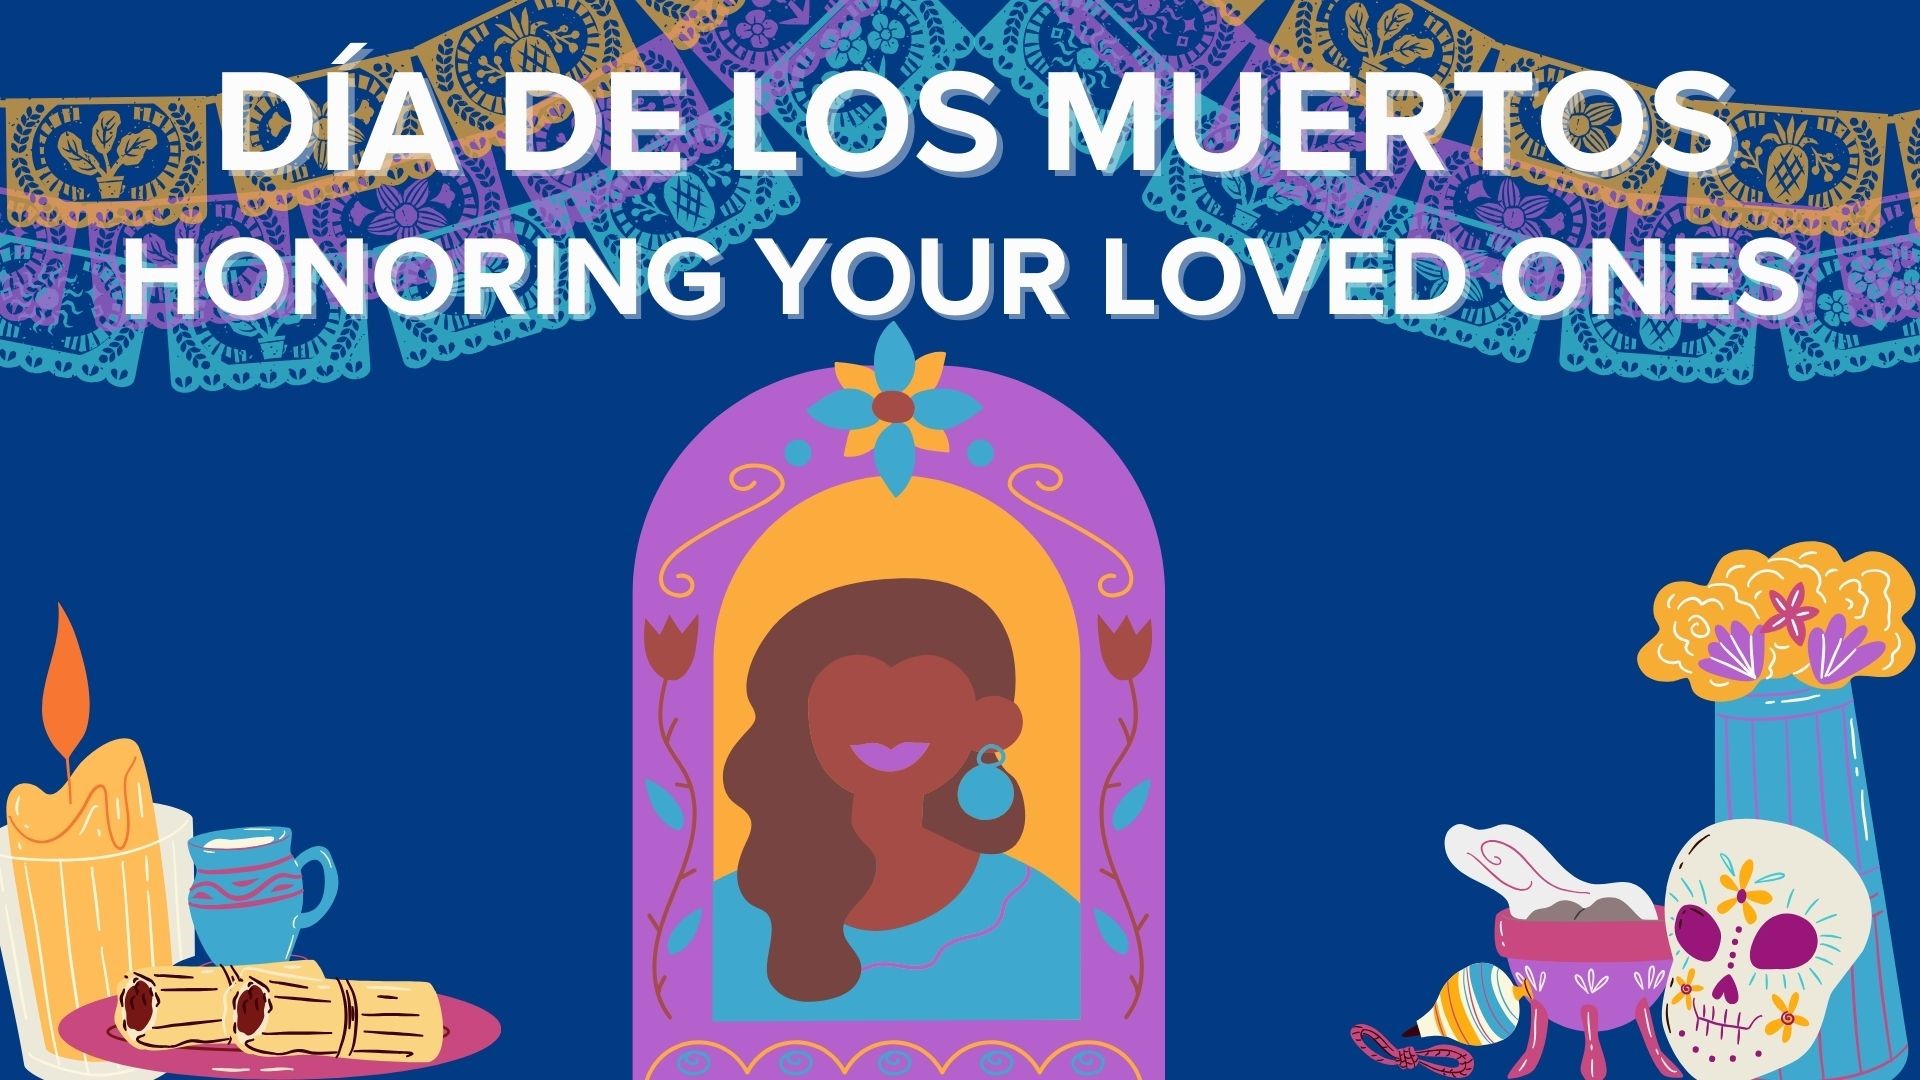 ABC10's Race and Culture team asked viewers who they'd like to honor for Día de los Muertos. In response, we created a community altar to celebrate loved ones.